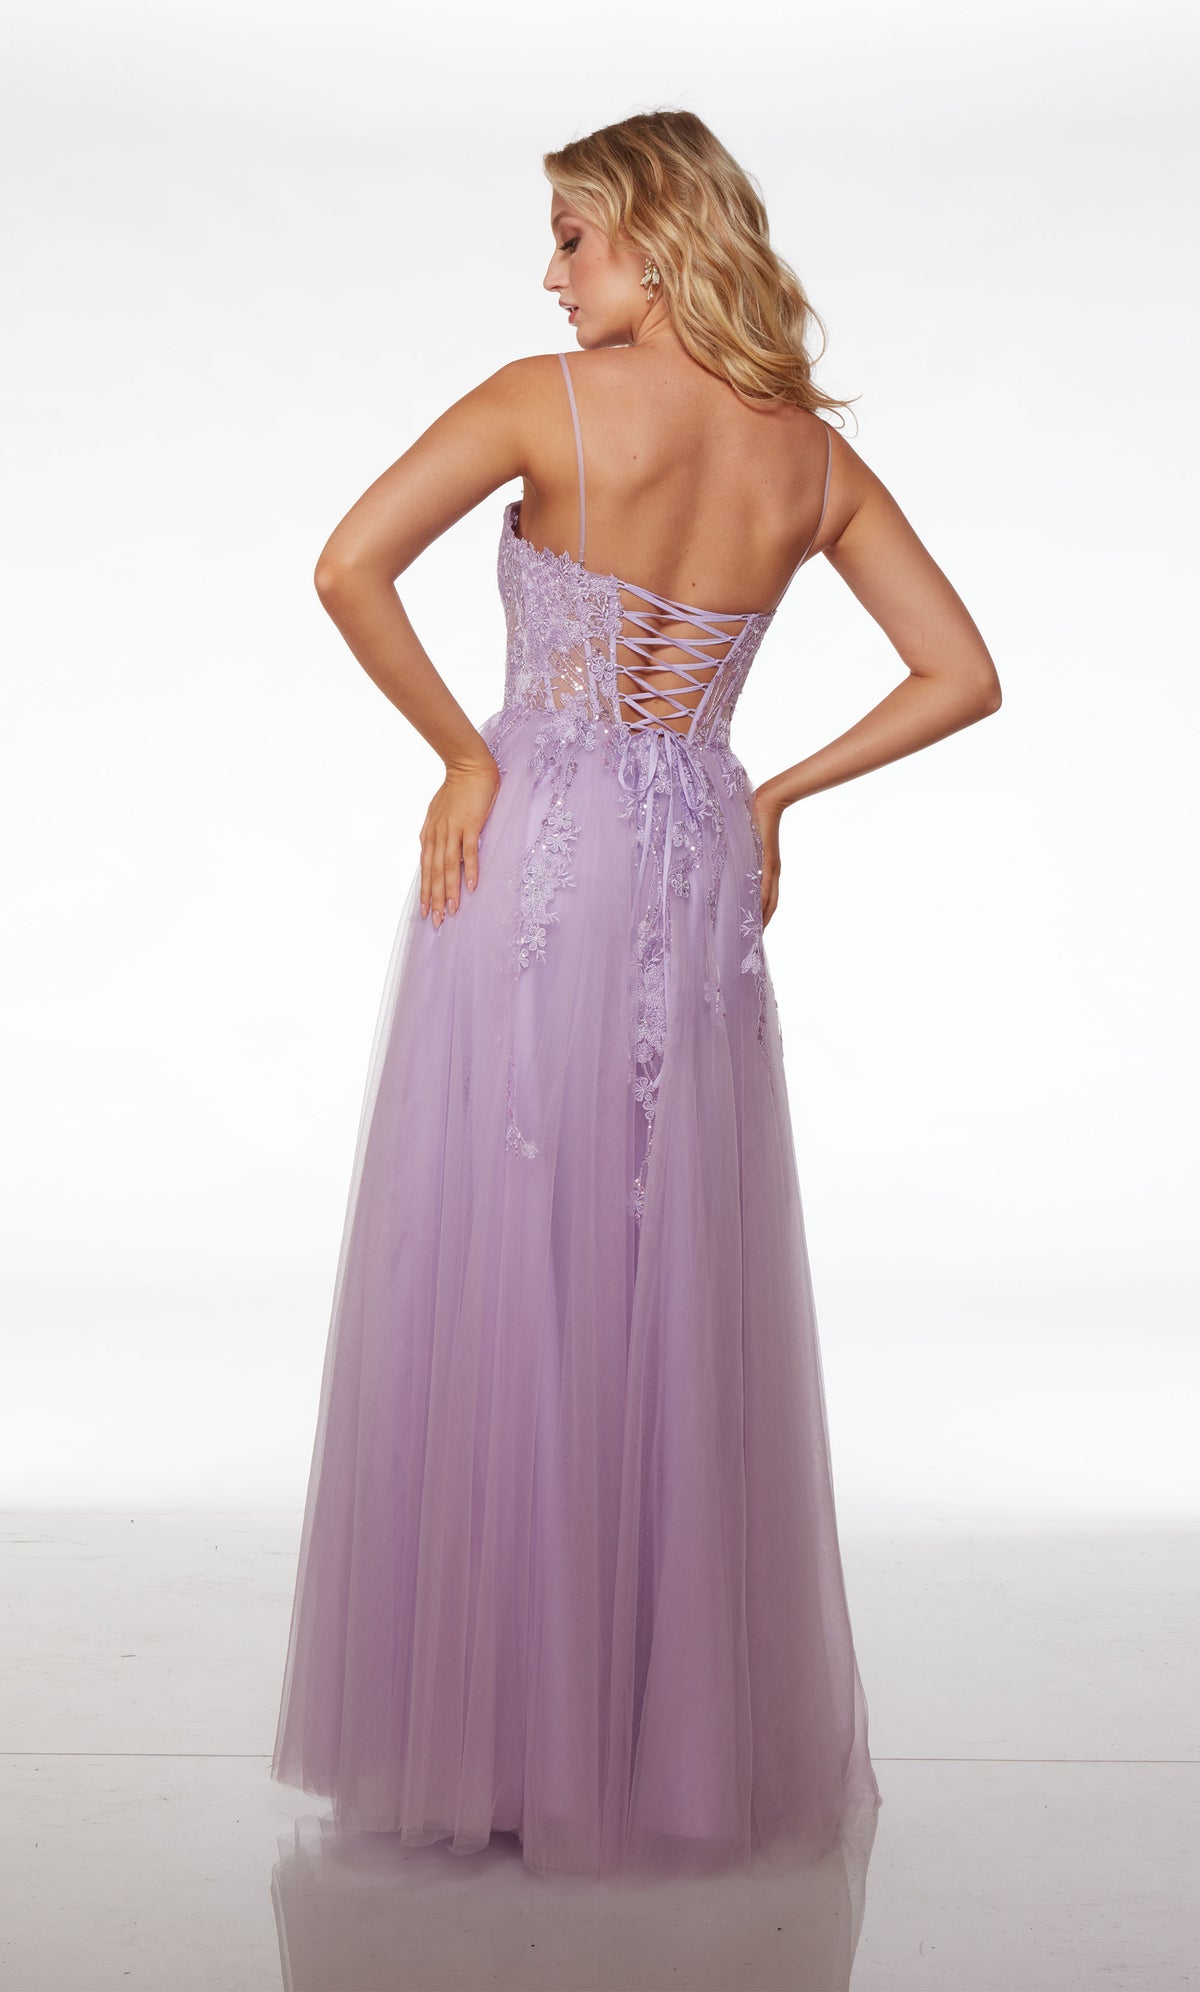 Purple dress featuring an sheer floral lace bodice and an crisscross lace-up back for an timeless and elegant aesthetic.